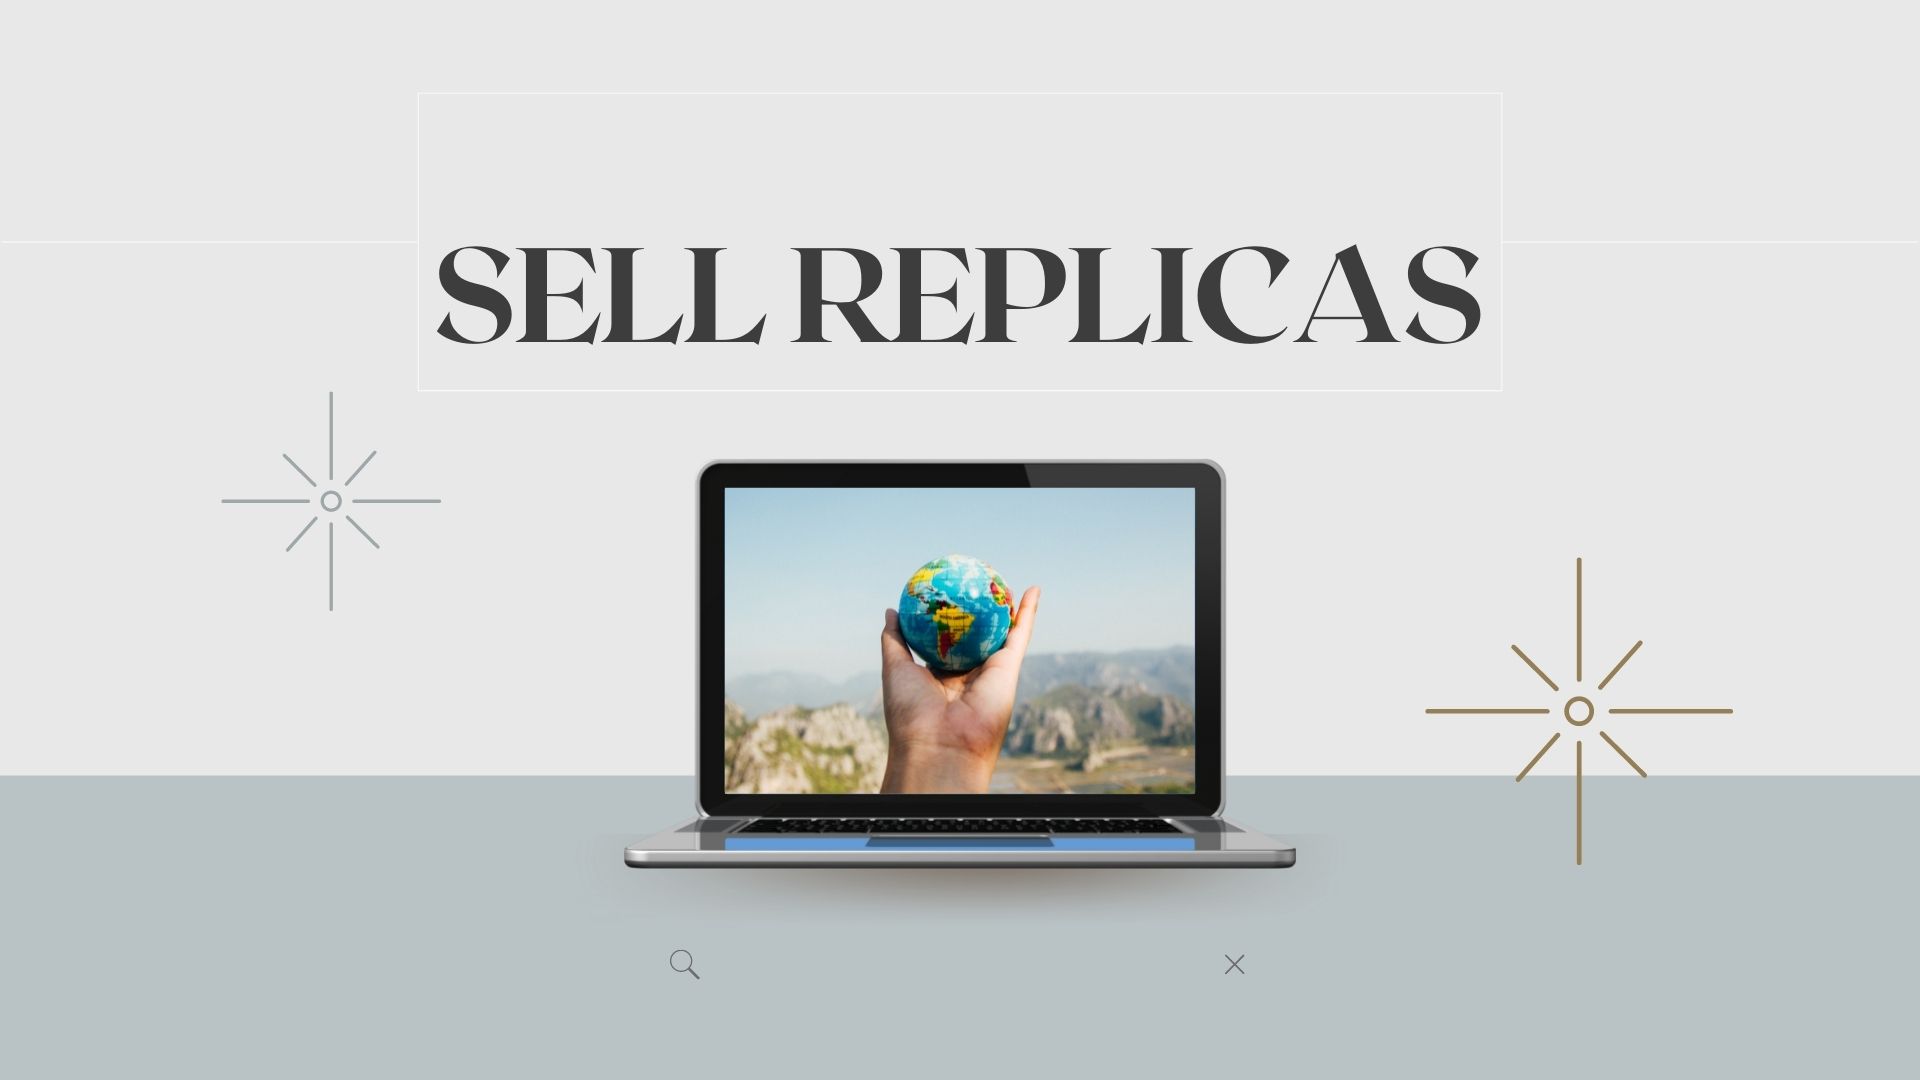 Can You Sell Replicas on Shopify